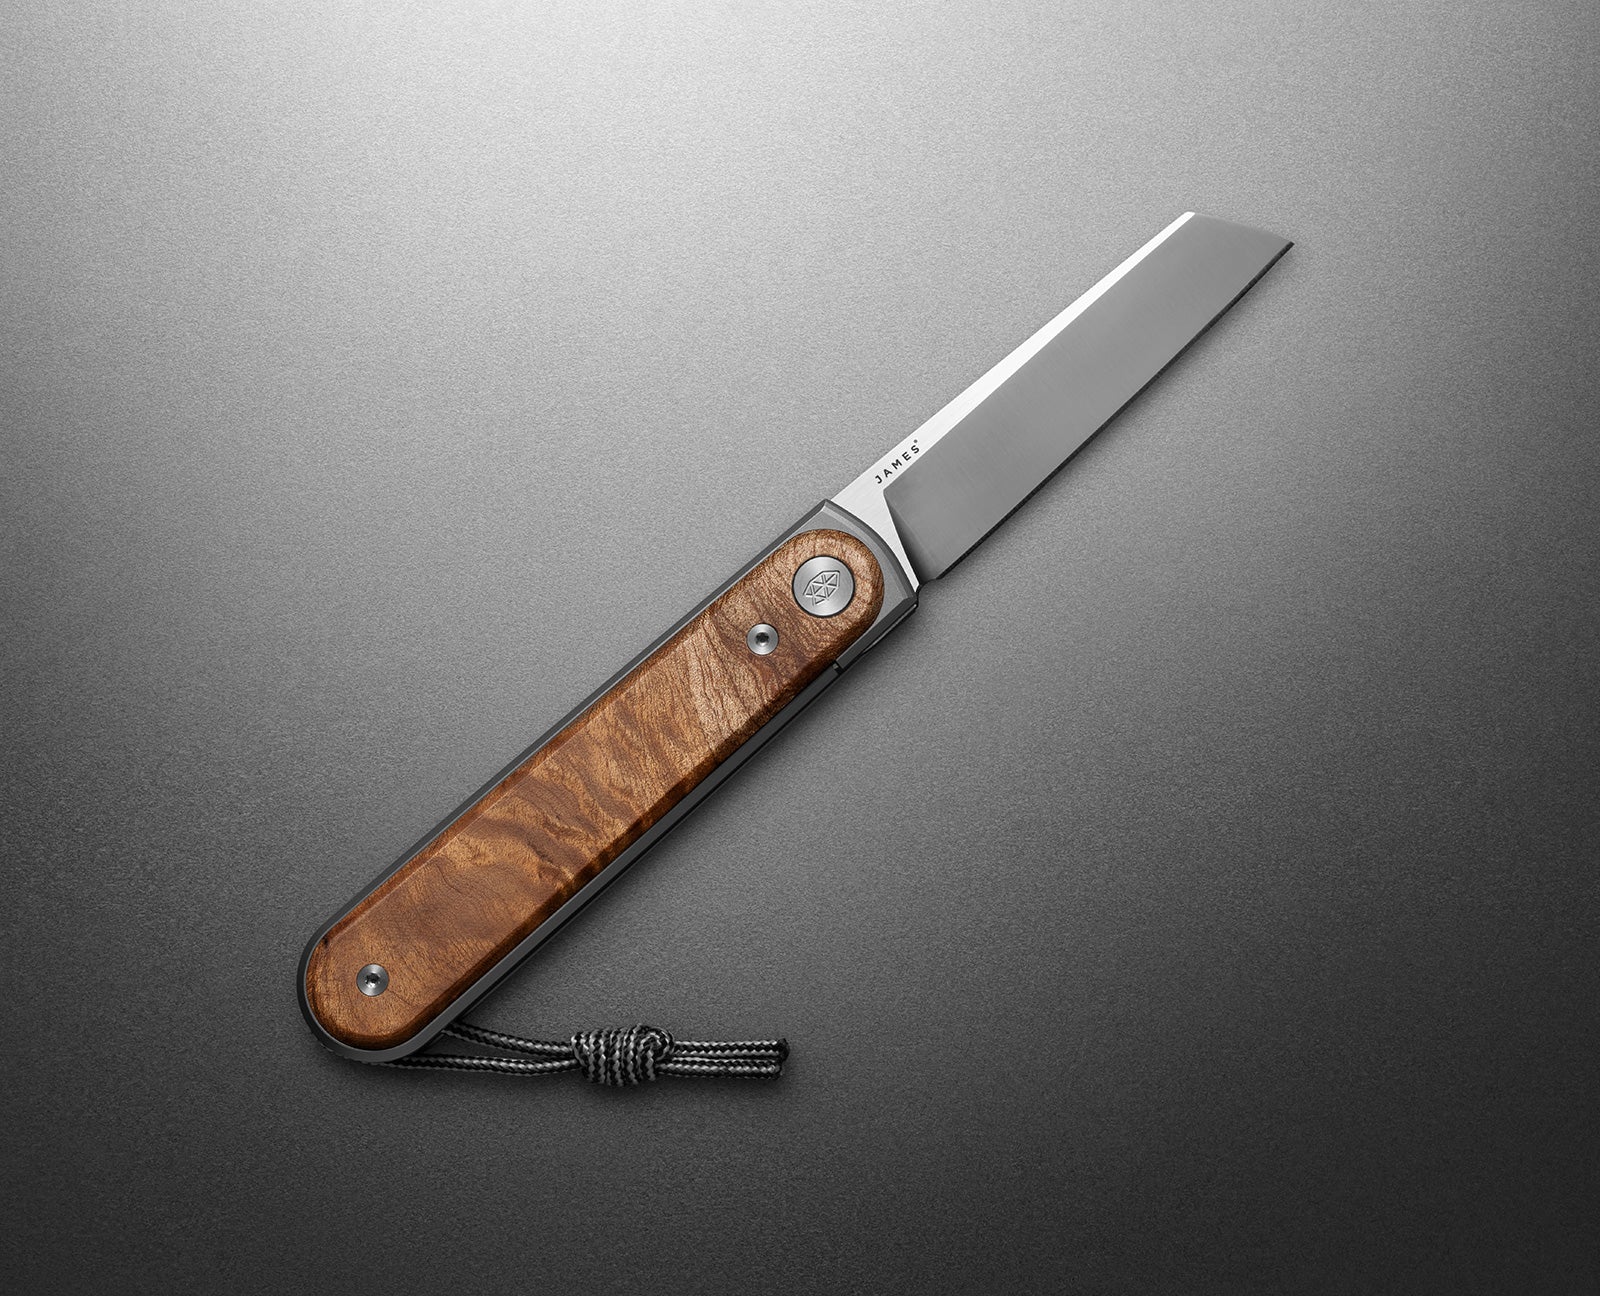 James Brand Elko knife review - a mini pocket knife with extra features -  The Gadgeteer